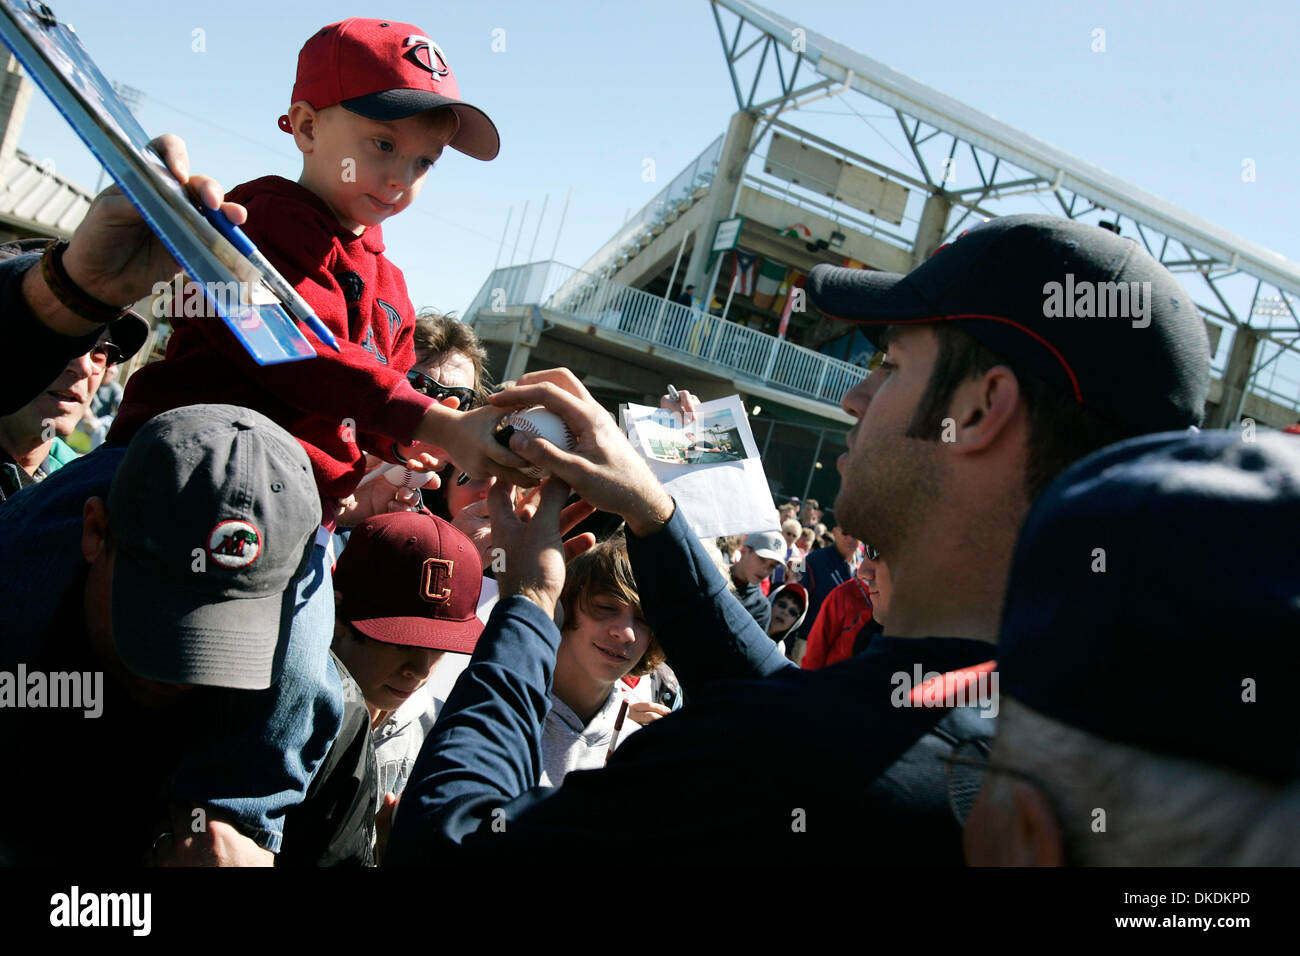 Feb 19, 2007 - Fort Myers, FL, USA - Minnesota Twins catcher JOE MAUER, 2006 American League batting champion, signs a baseball for ANDREW GLEASON, 3, atop the shoulders of his father Matt, at the end of the spring training opener for pitchers and catchers Monday at the Lee County Sports Complex. The Gleasons moved to Fort Myers from St. Paul in 2006 and remain Twins fans.(Credit I Stock Photo